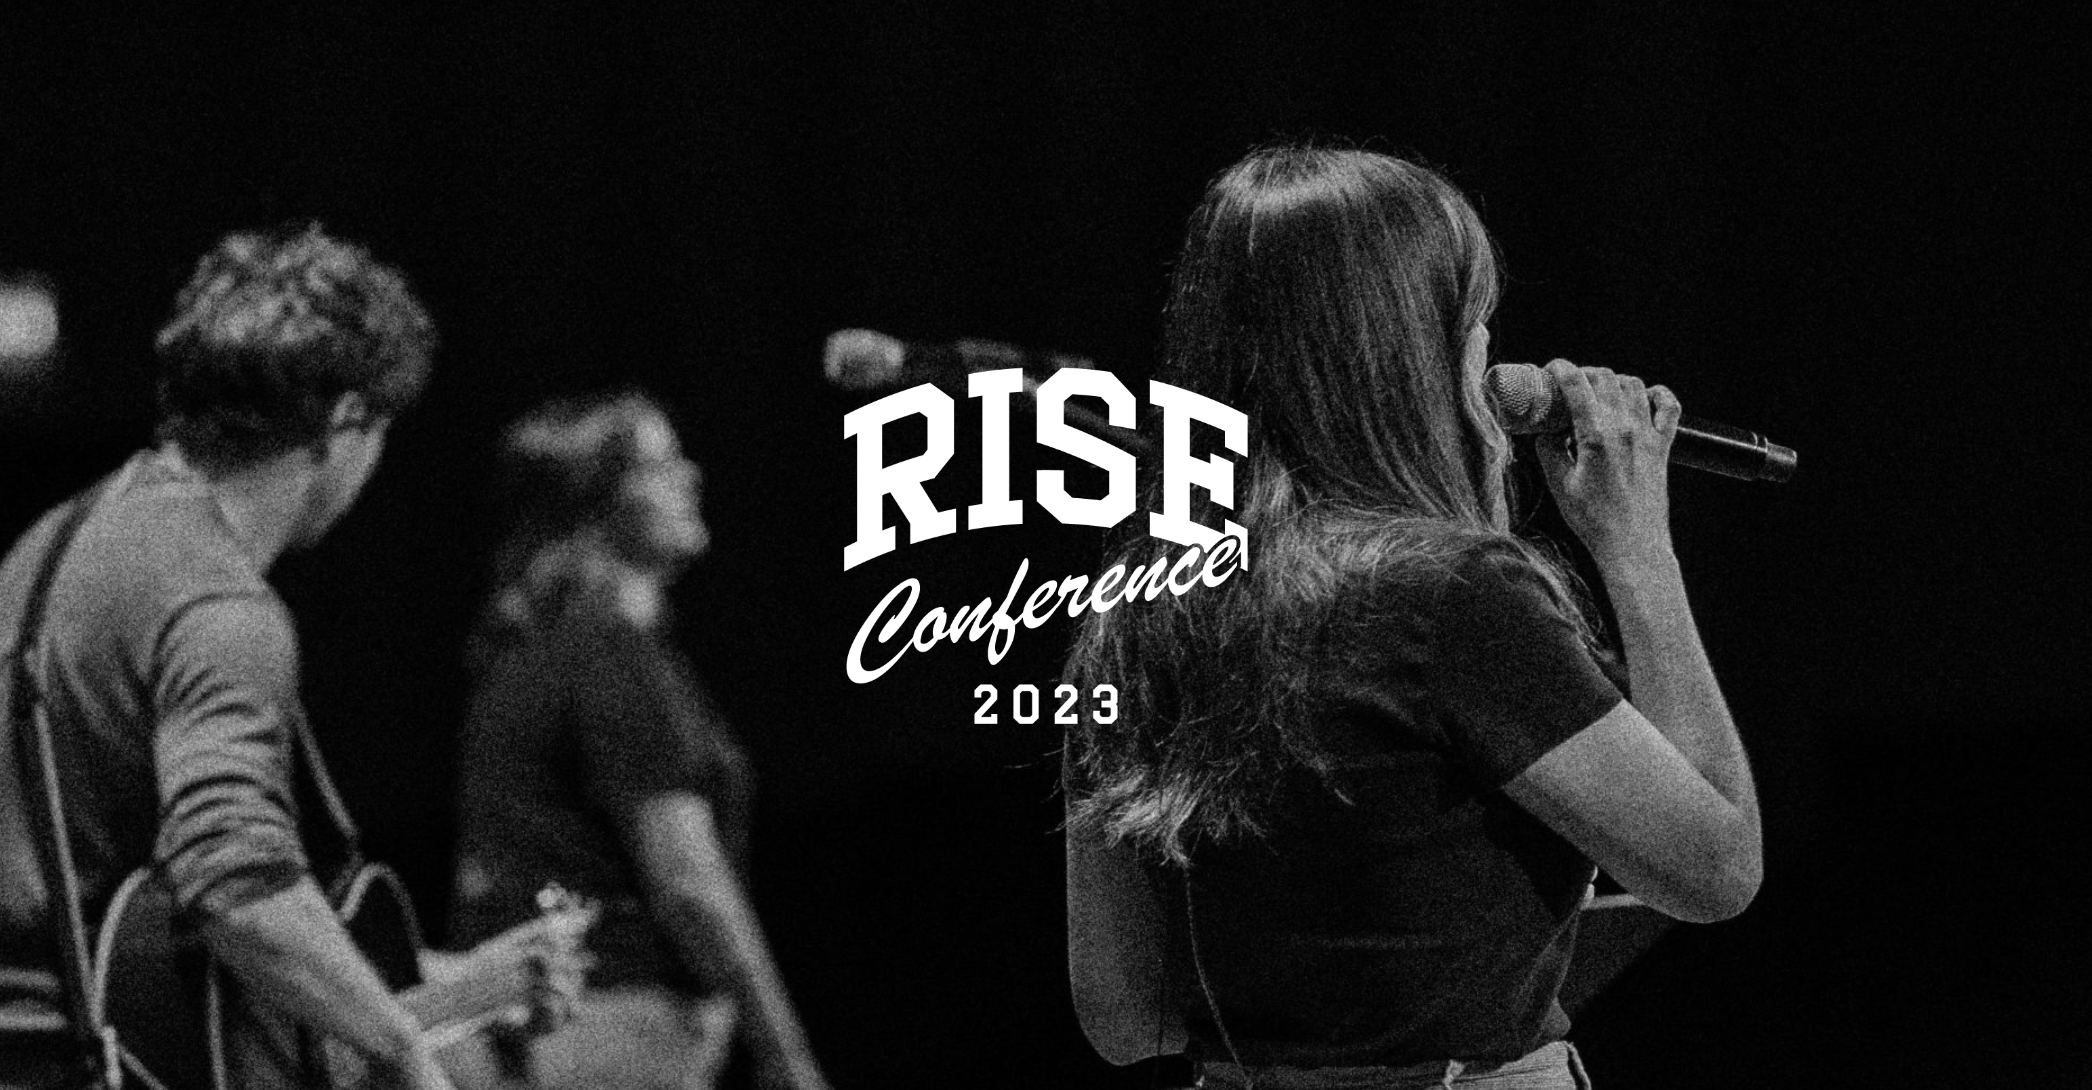 RISE Conference Northview Community Church